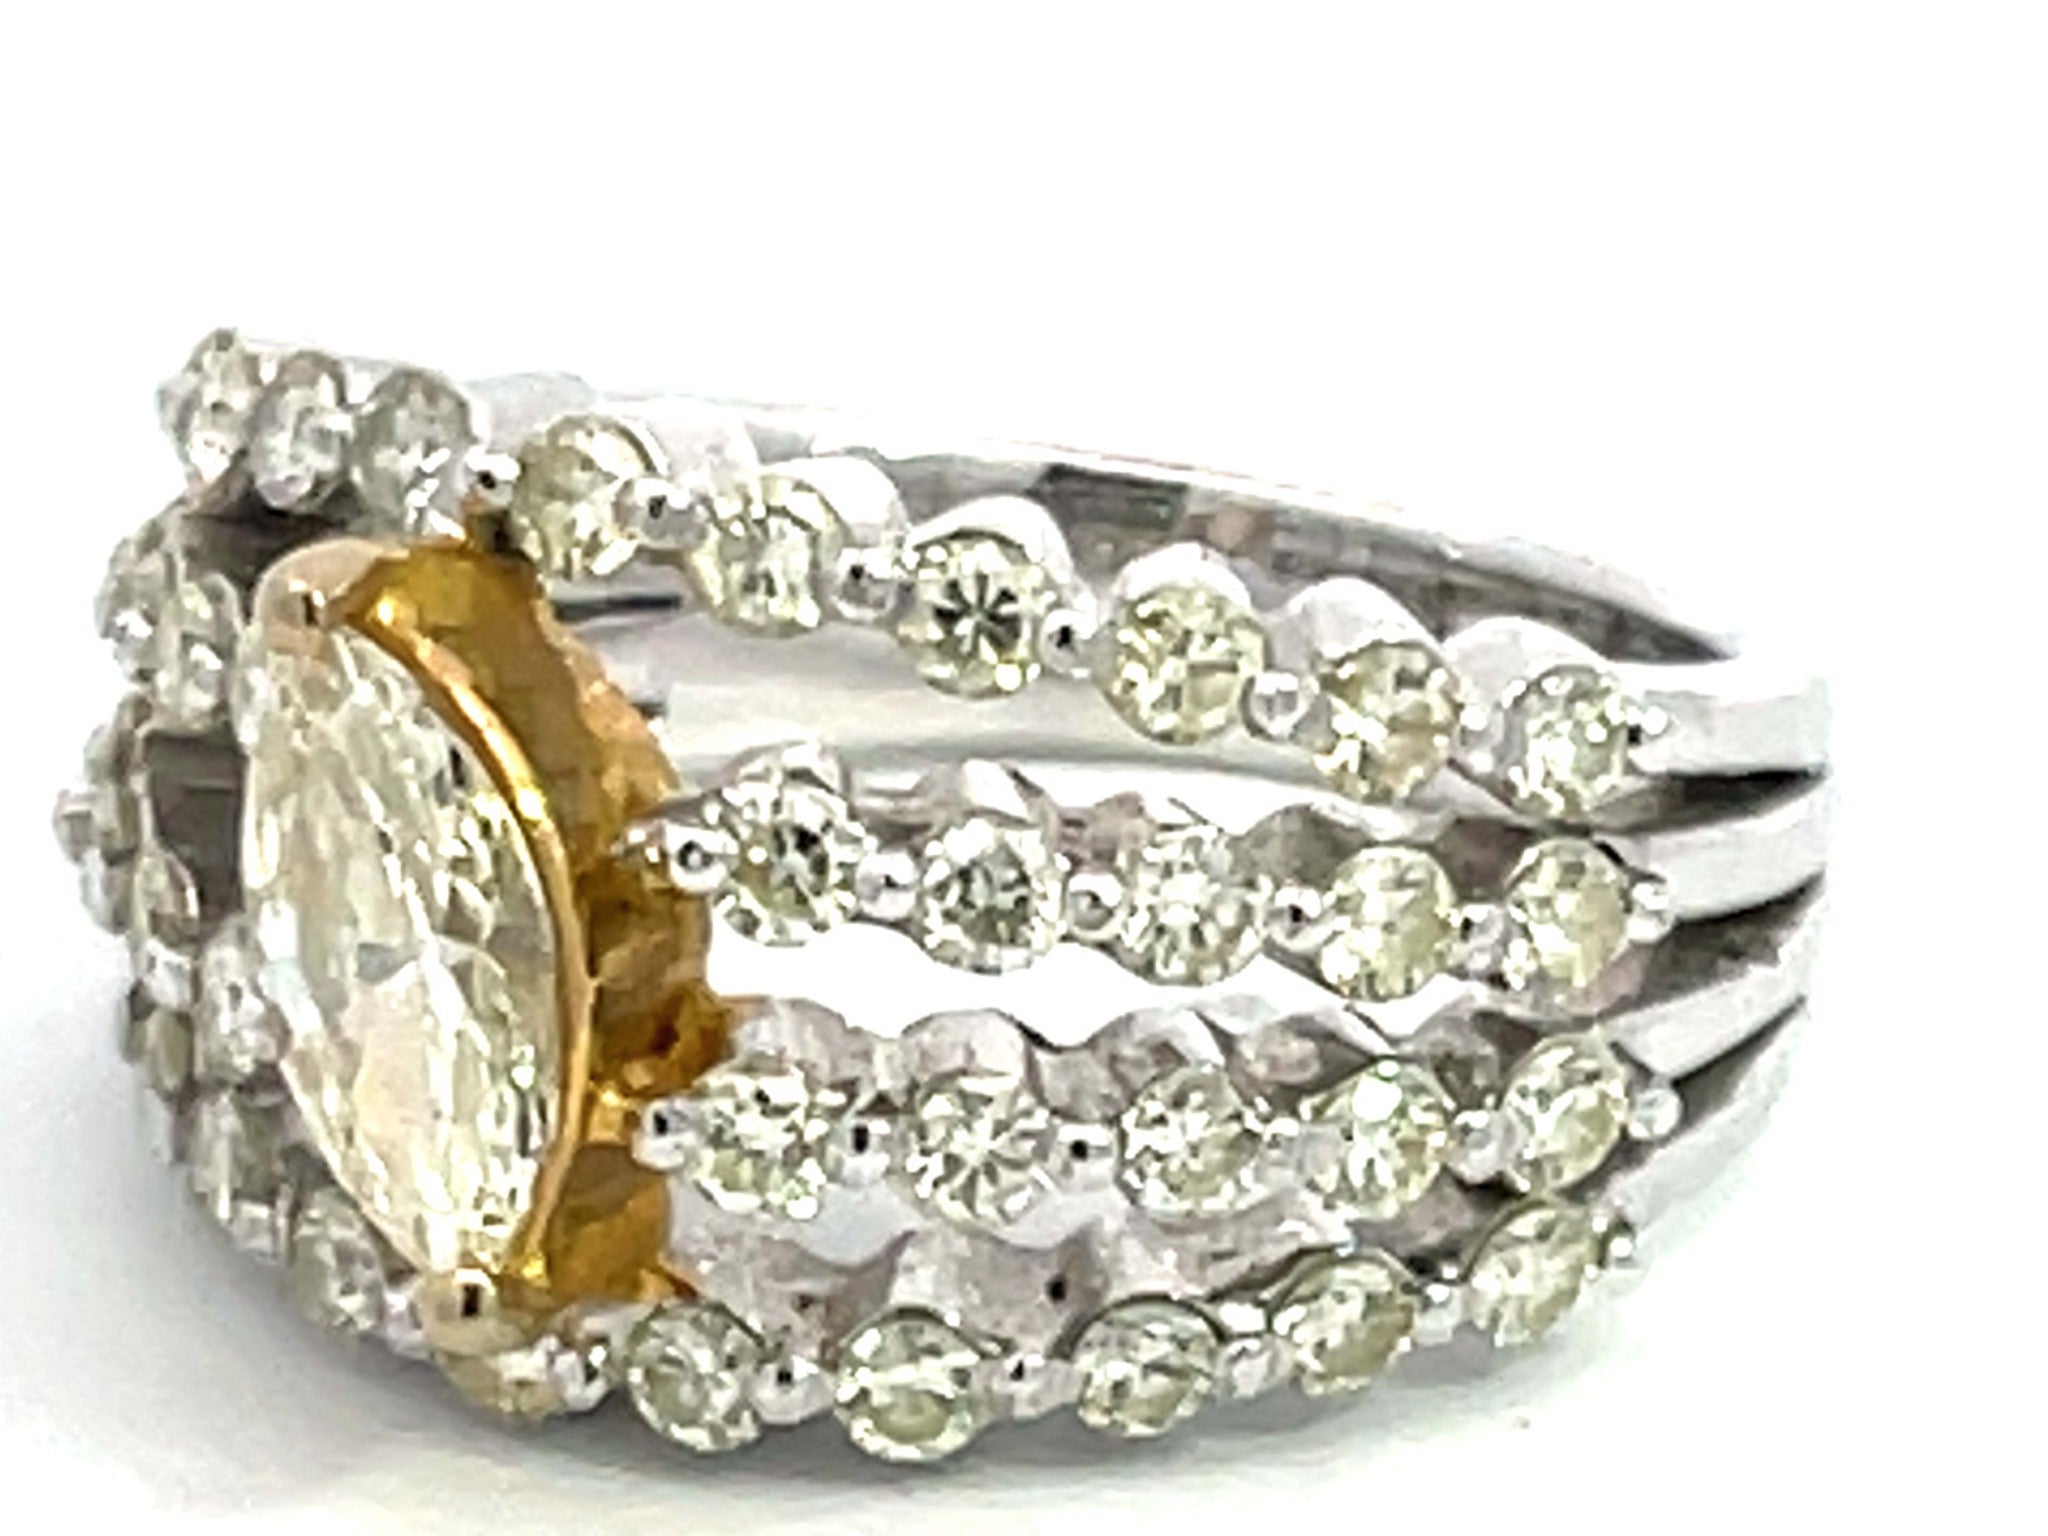 Four Row Diamond Band with Yellow Marquise Diamond Center Ring in 18k White Gold